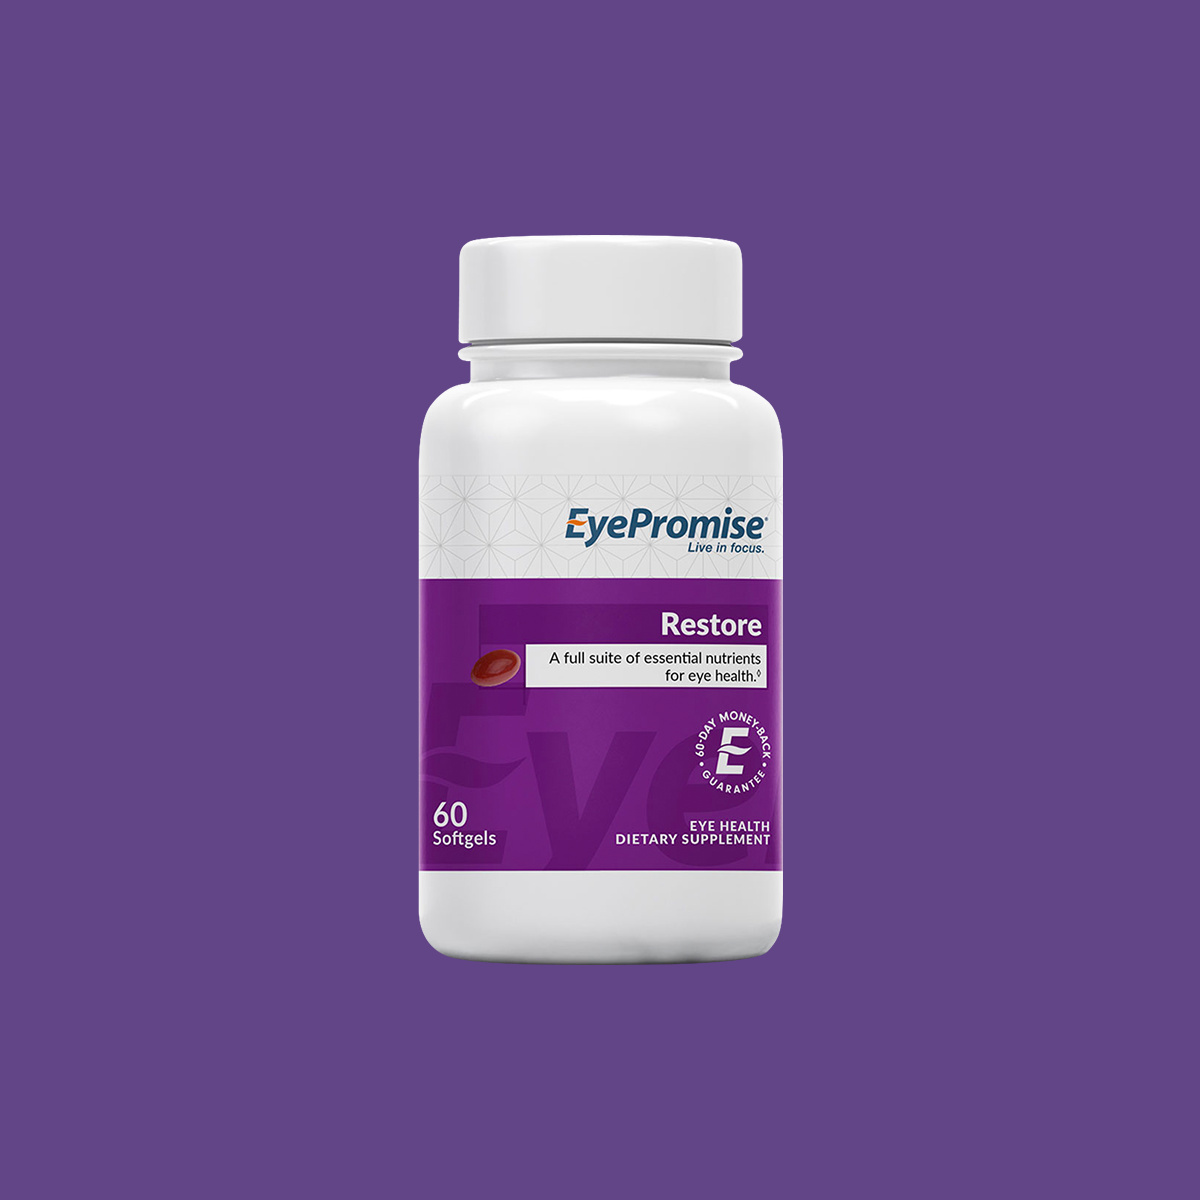 EyePromise Restore - 60 Softgel with Lutein, Vitamin C, Vitamin D, Vitamin E, Omega-3 Fish Oil, and Zeaxanthin